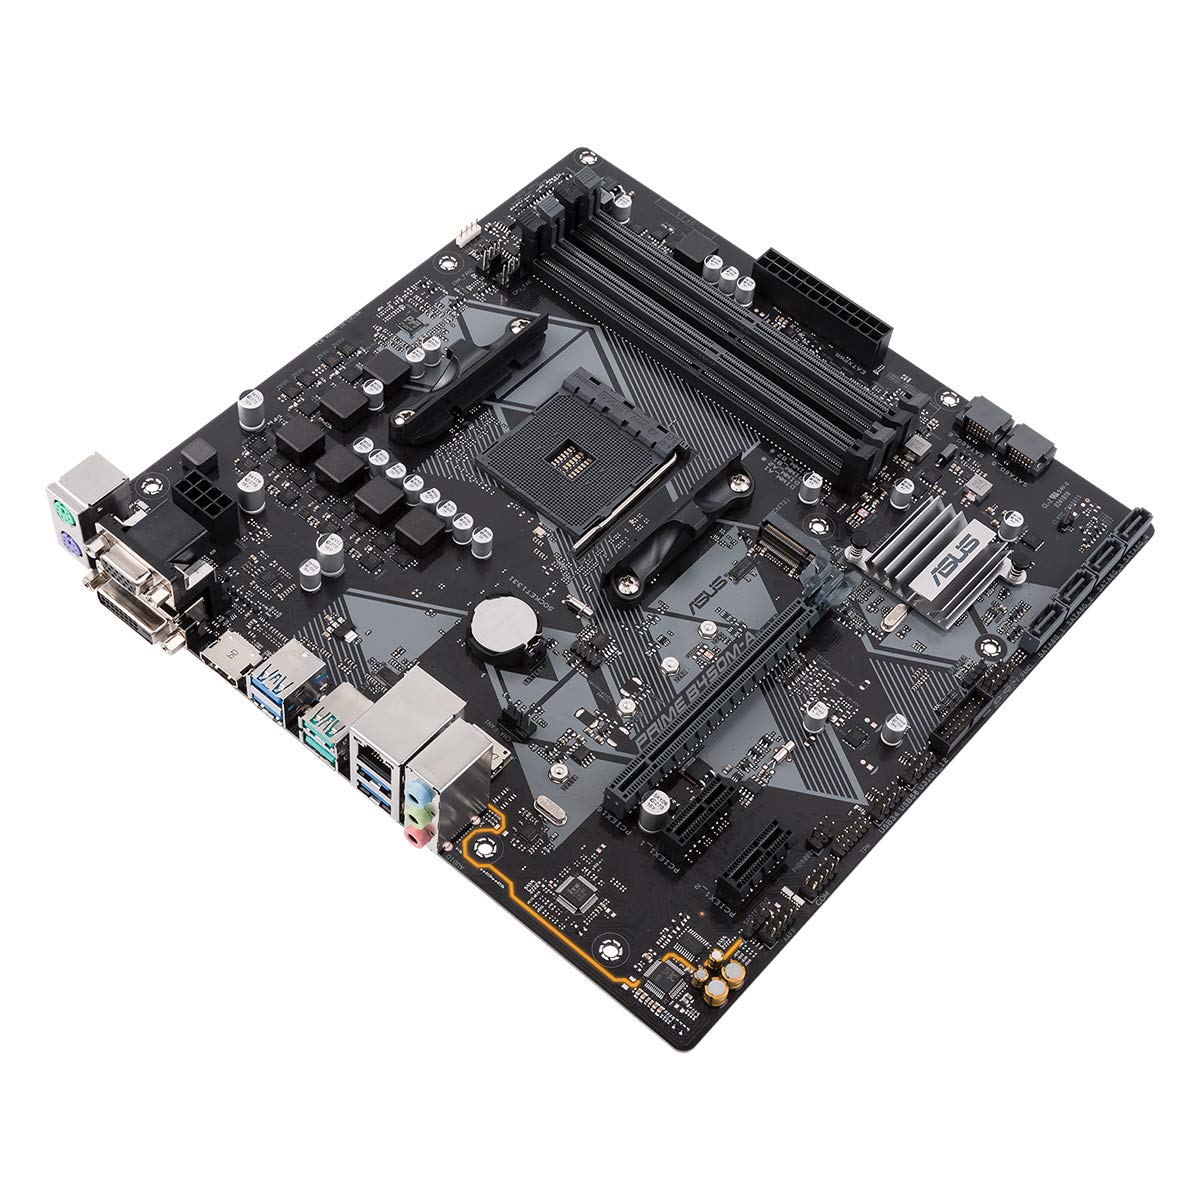 ASUS PRIME B450M-A AMD AM4 MOTHERBOARD